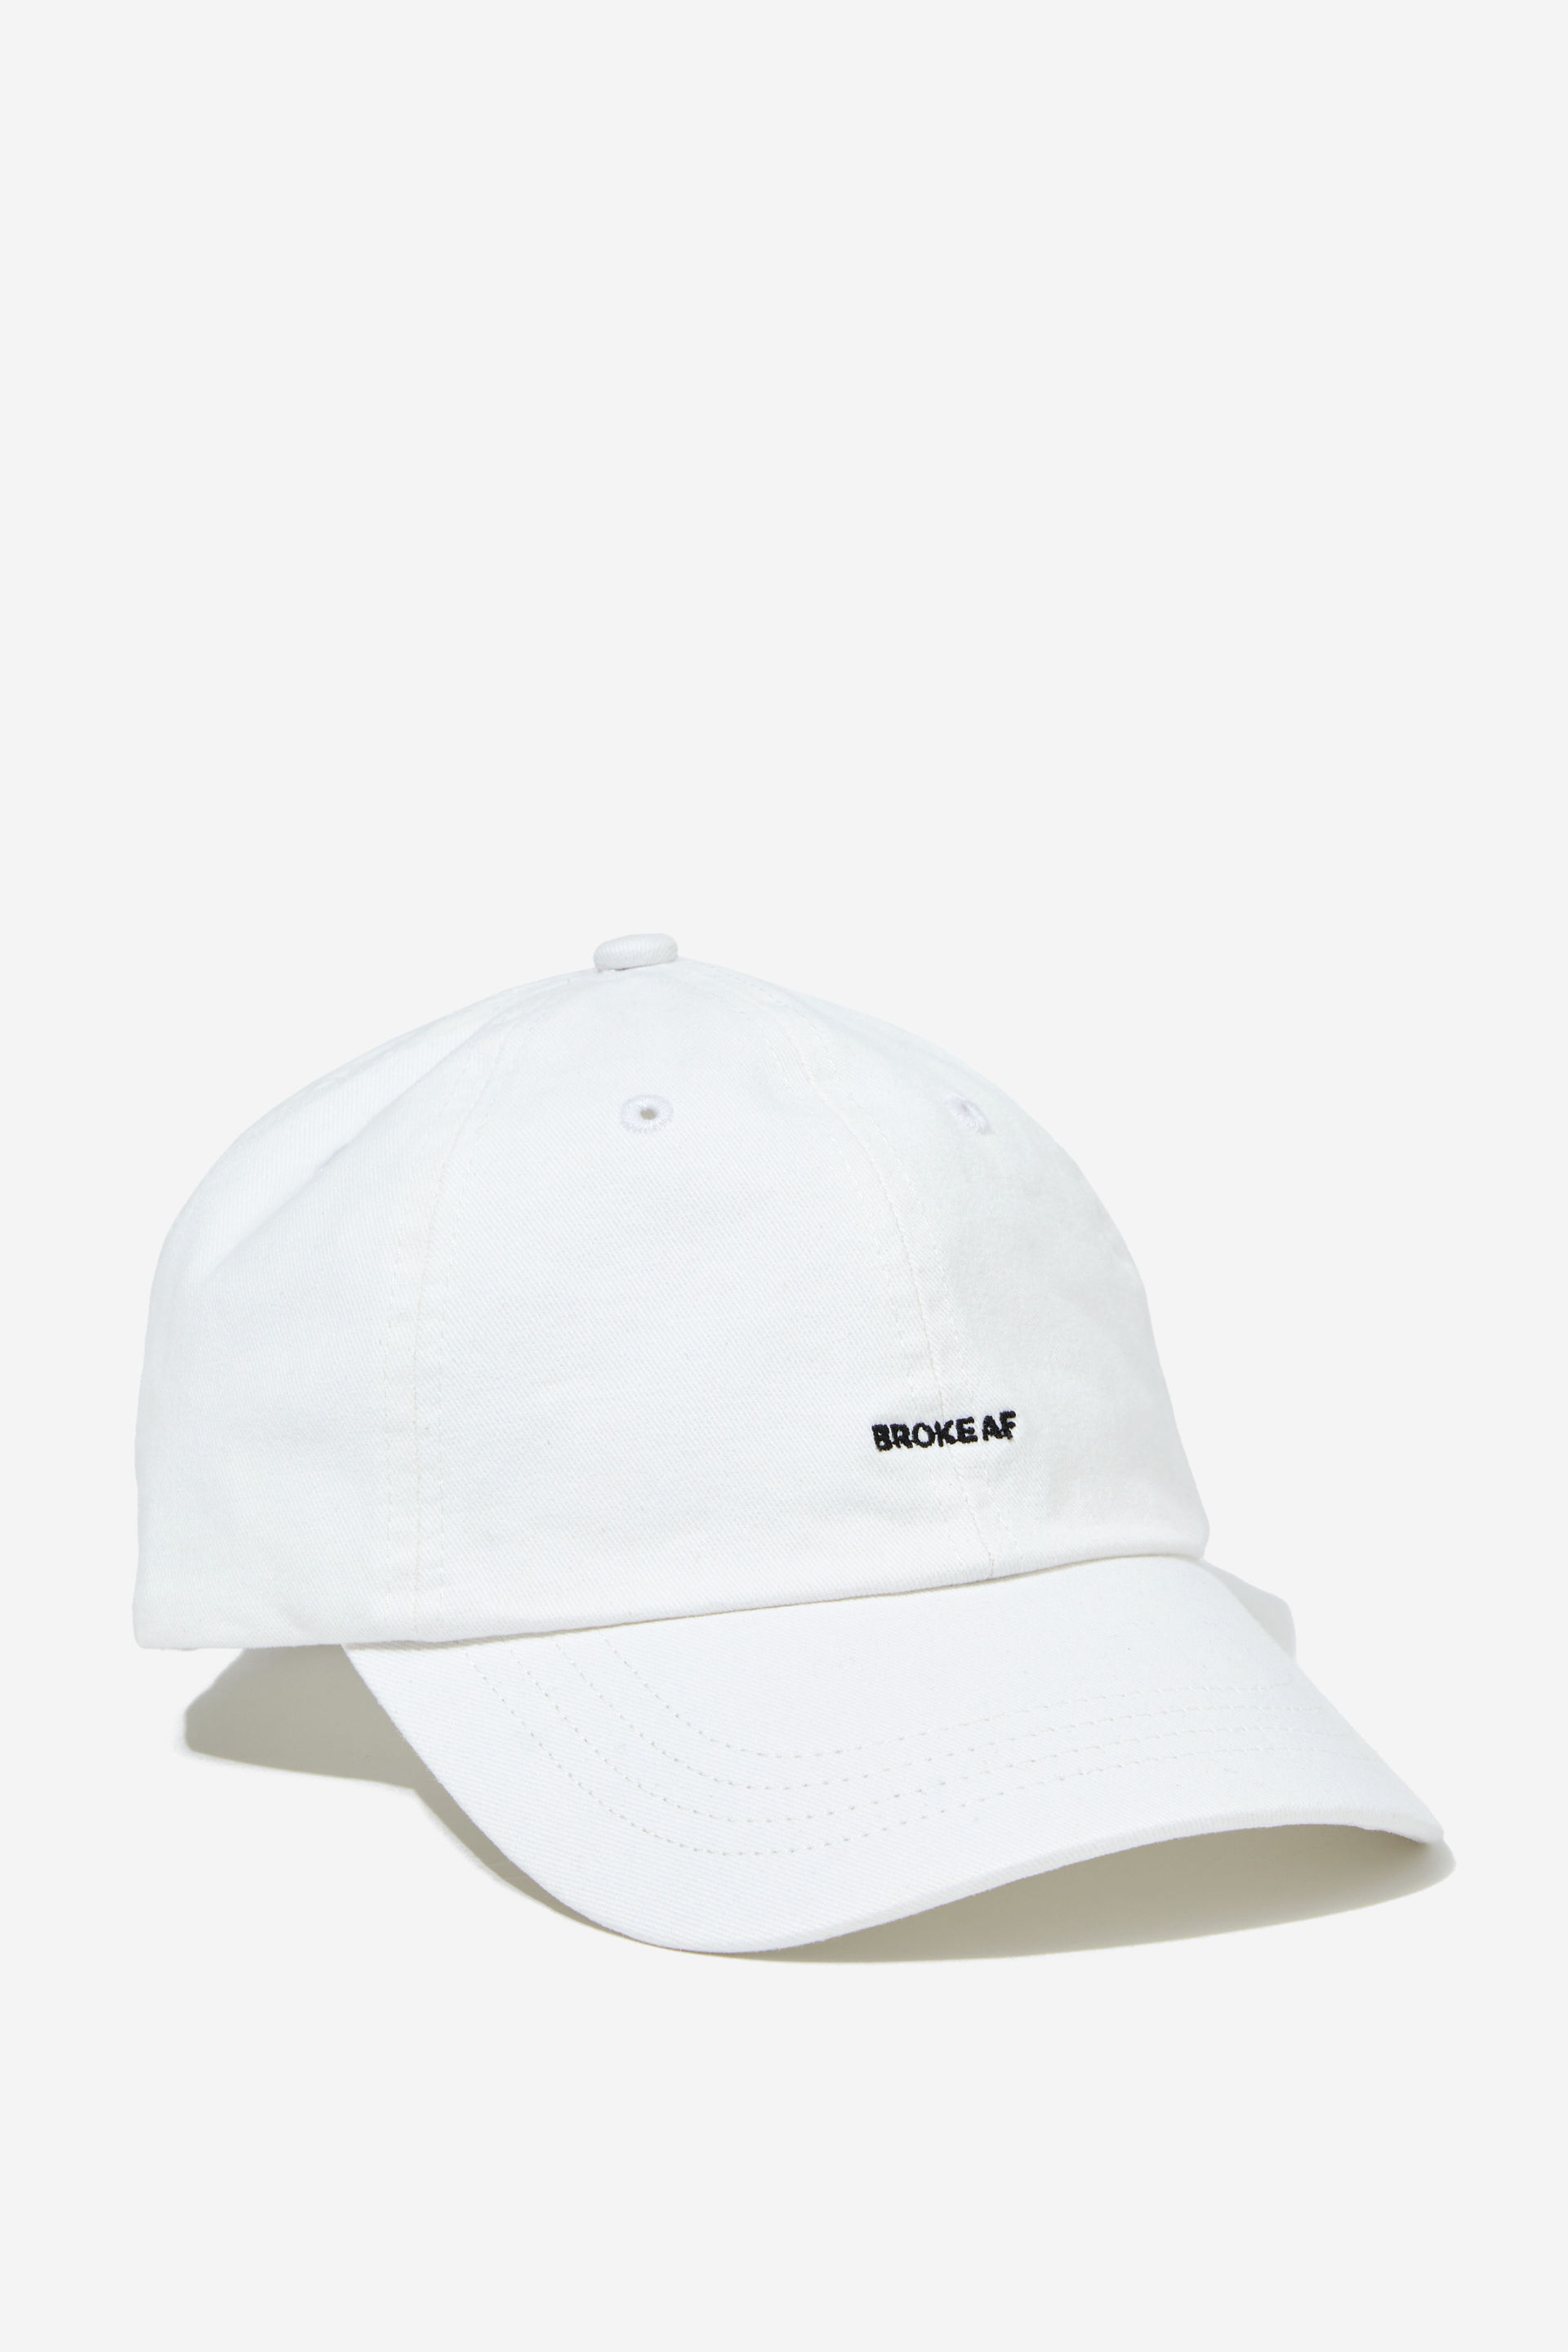 Typo - Just Another Dad Cap - White broke af!